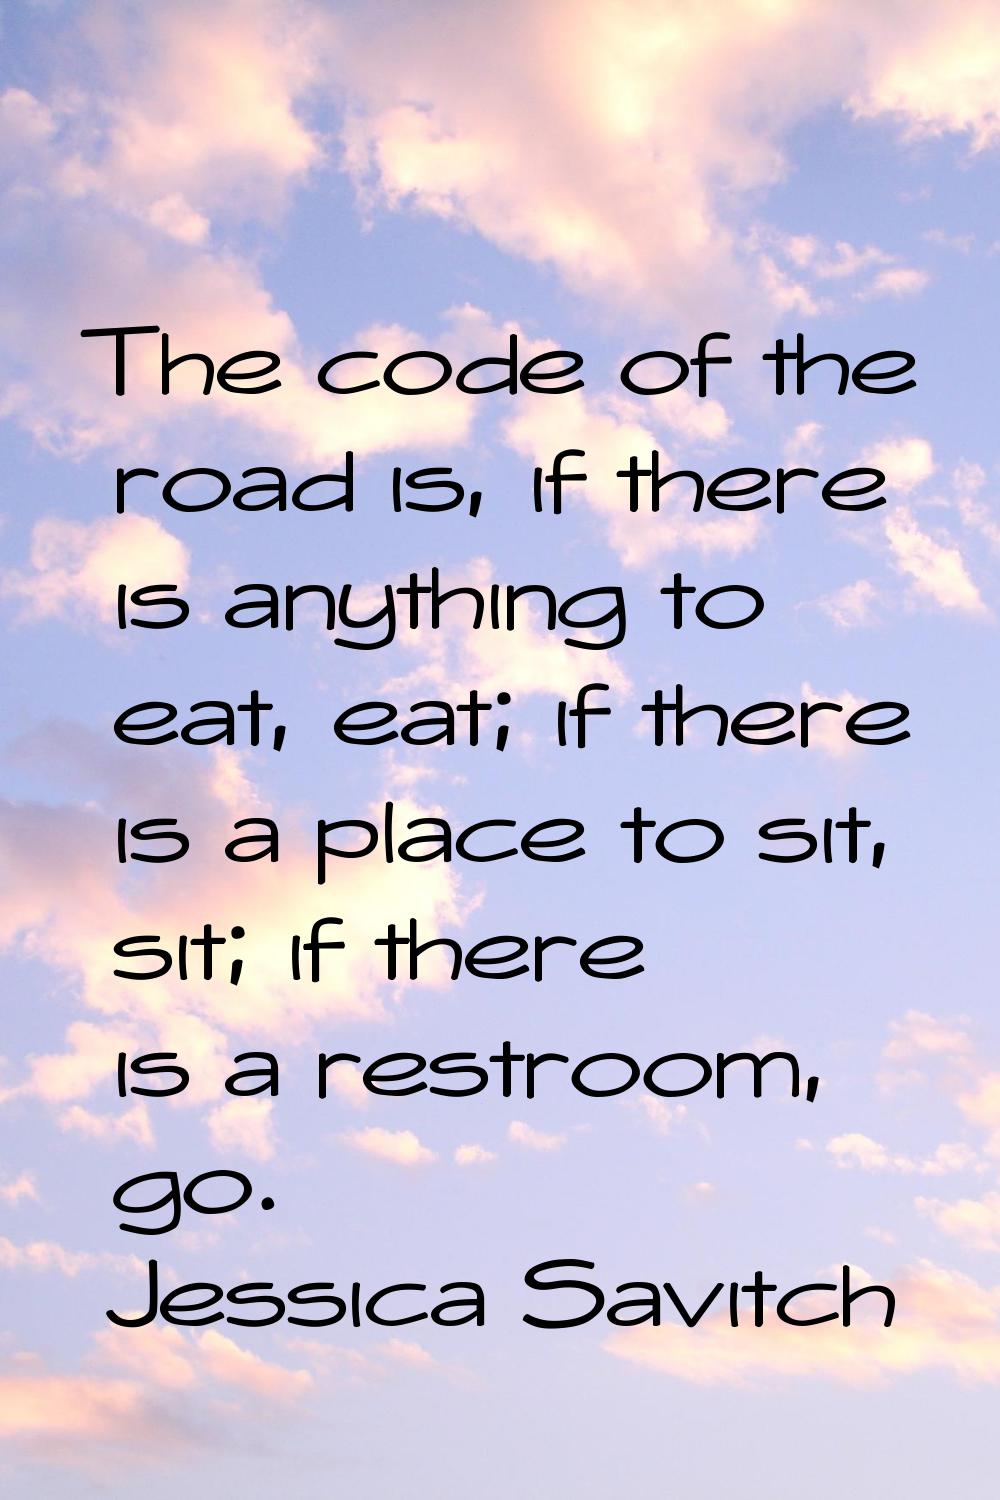 The code of the road is, if there is anything to eat, eat; if there is a place to sit, sit; if ther